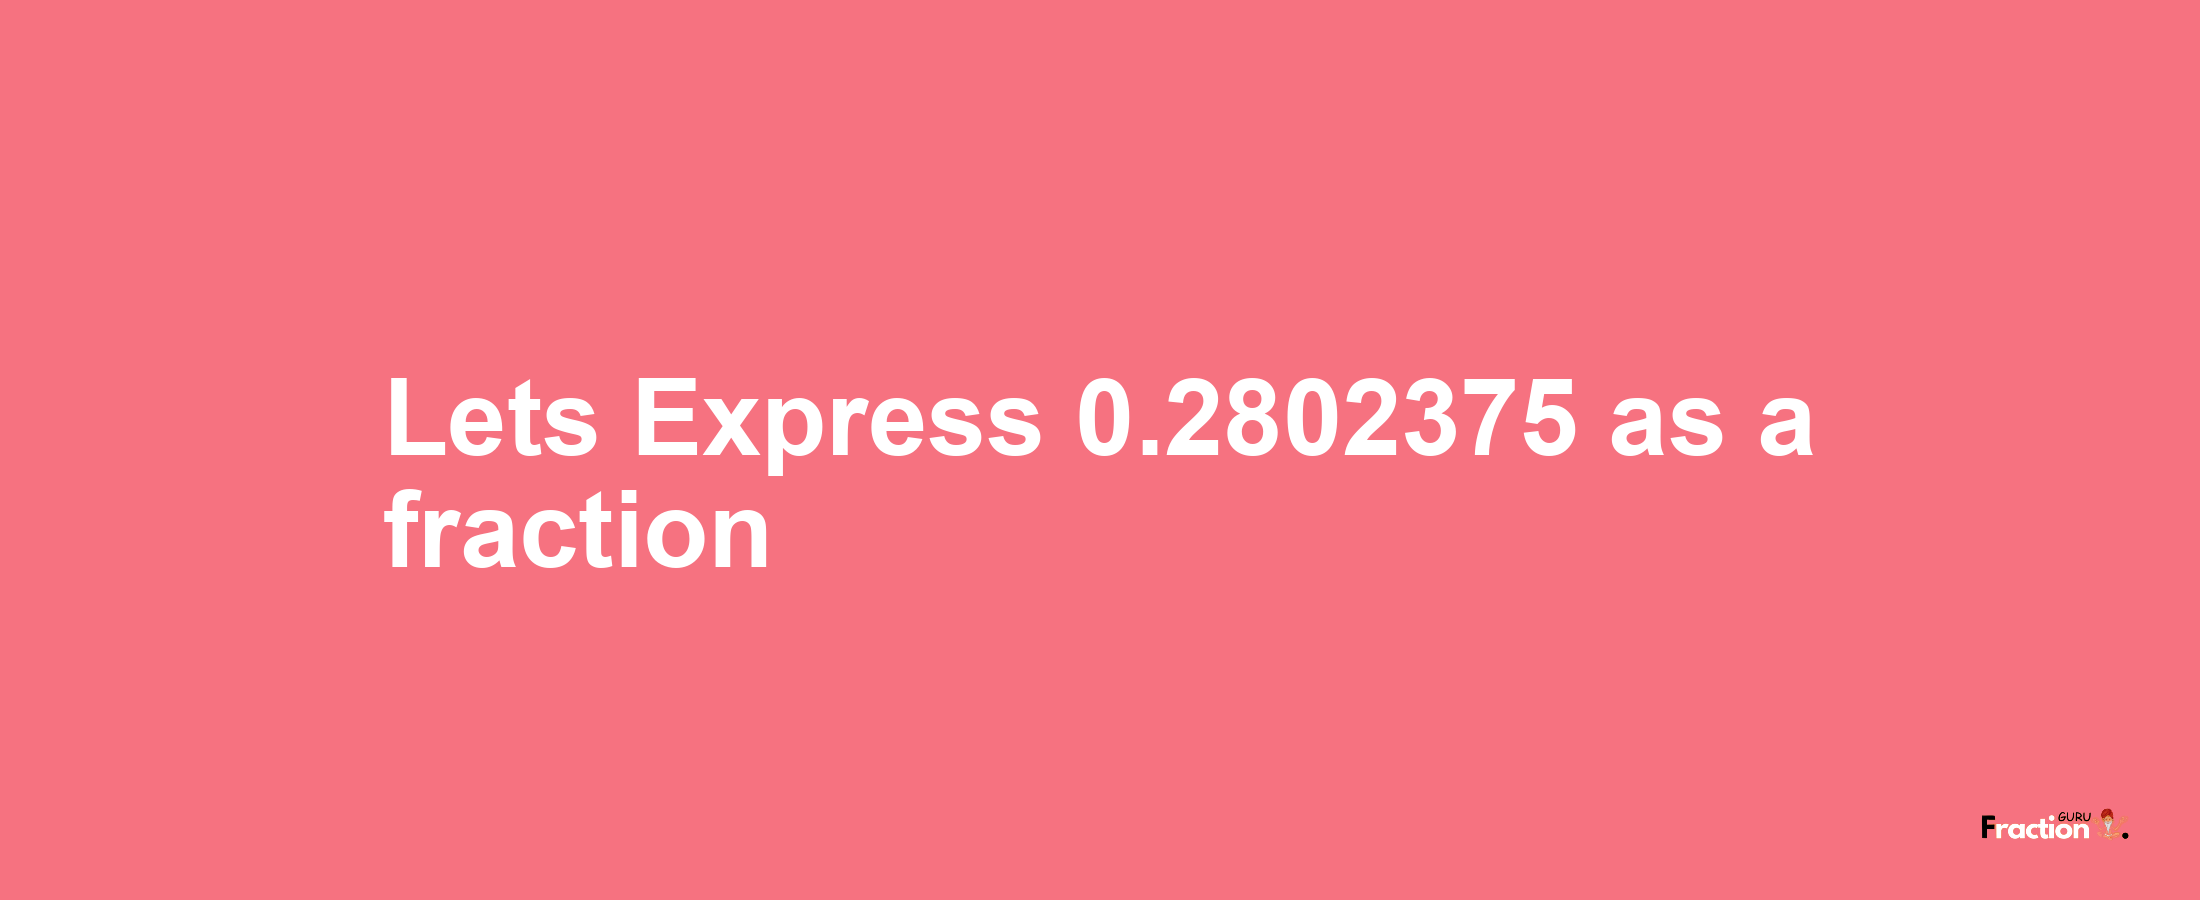 Lets Express 0.2802375 as afraction